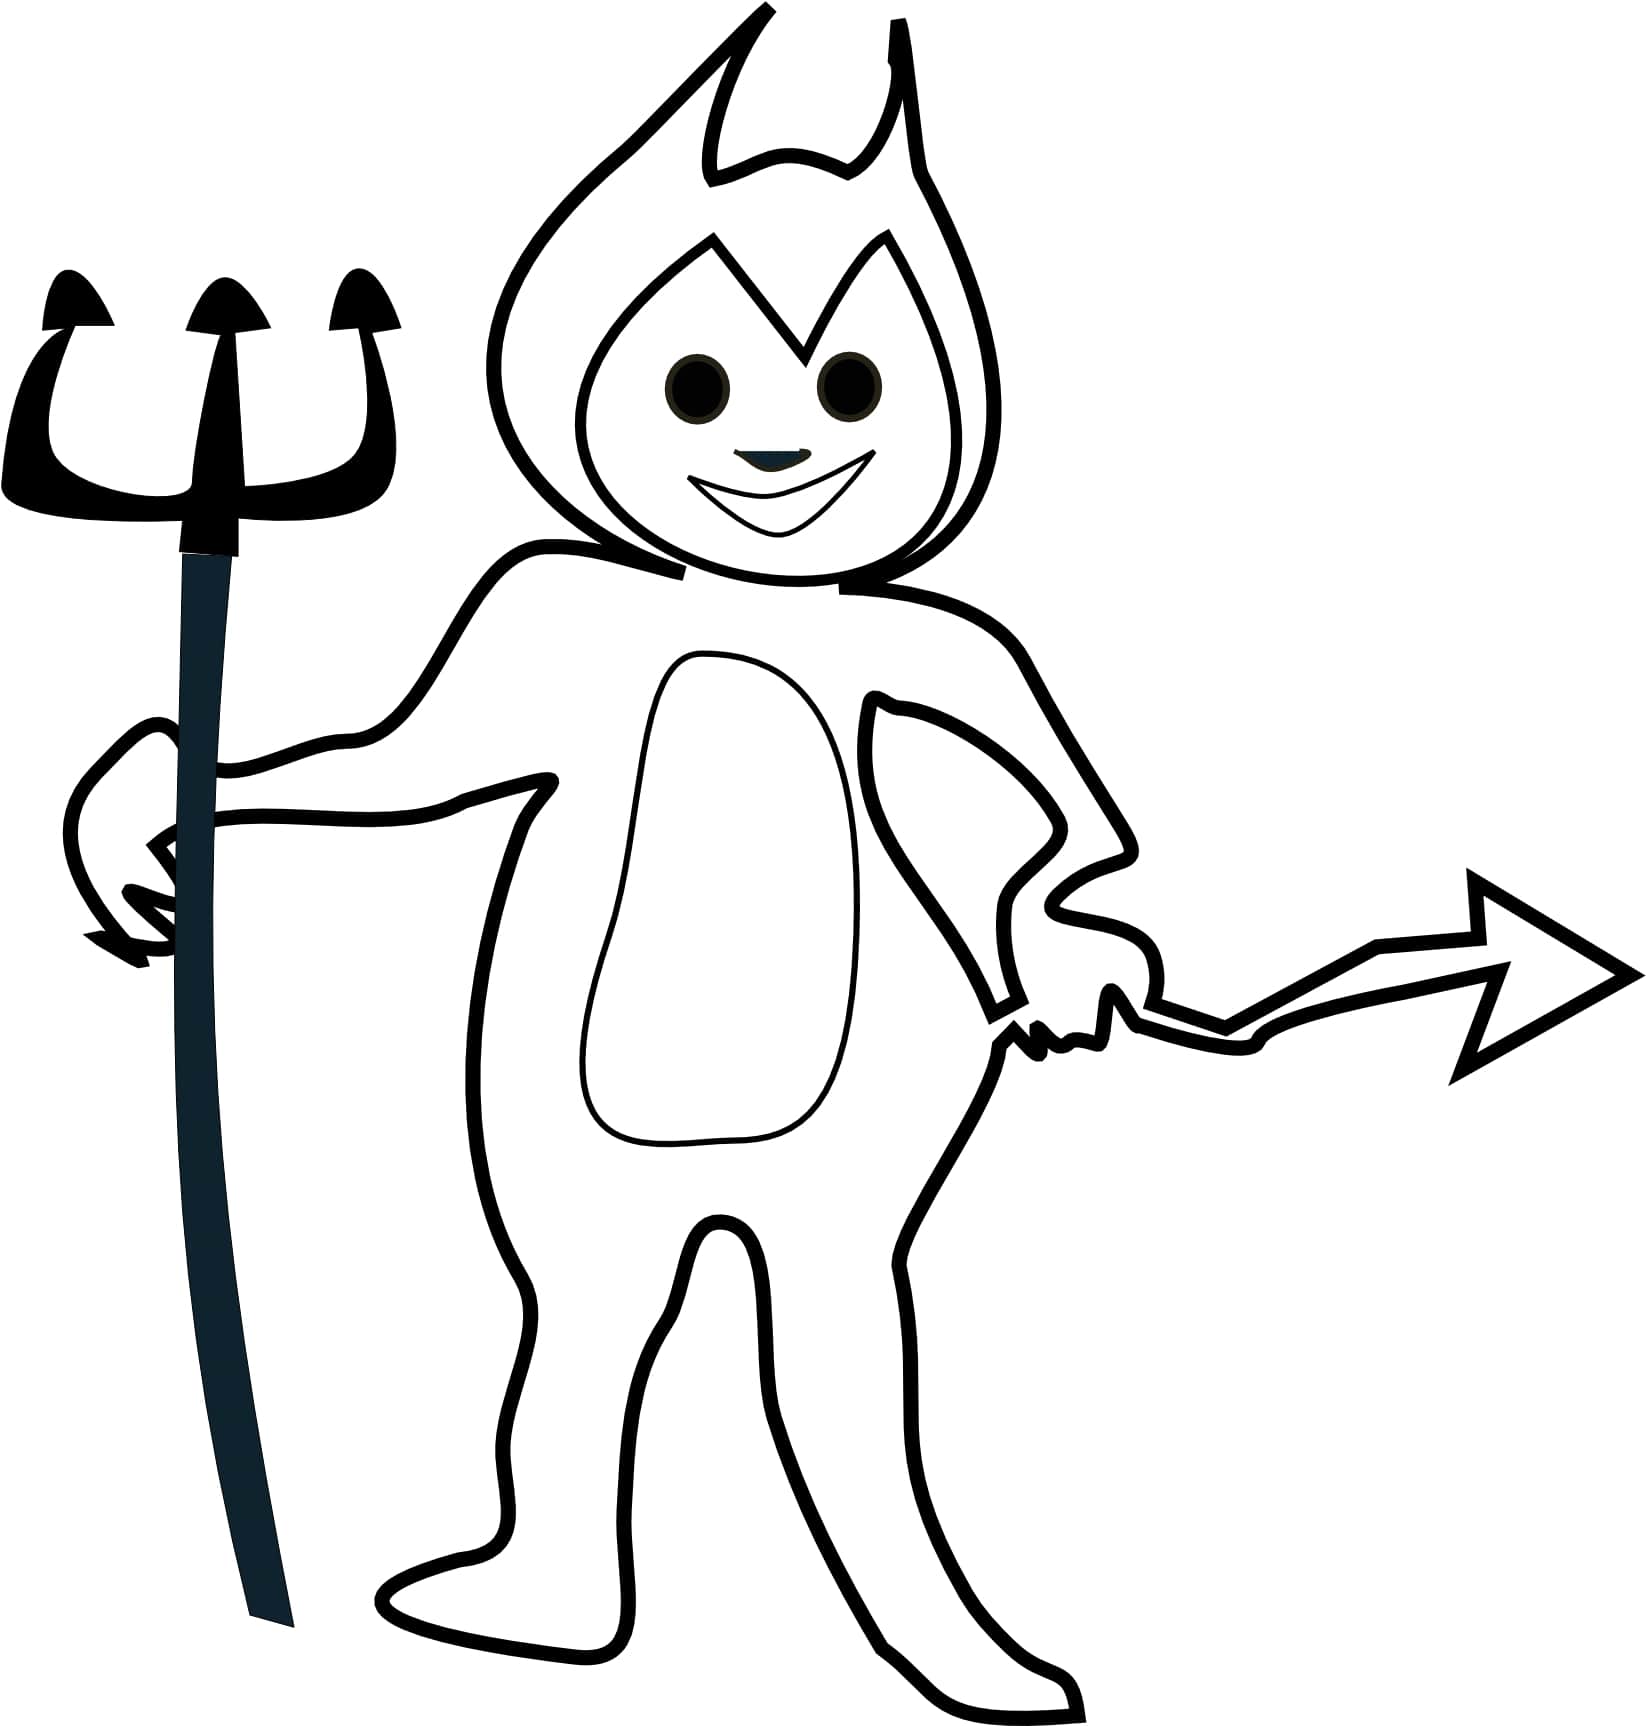 Cute Devil Coloring Page - Free Printable Coloring Pages for Kids